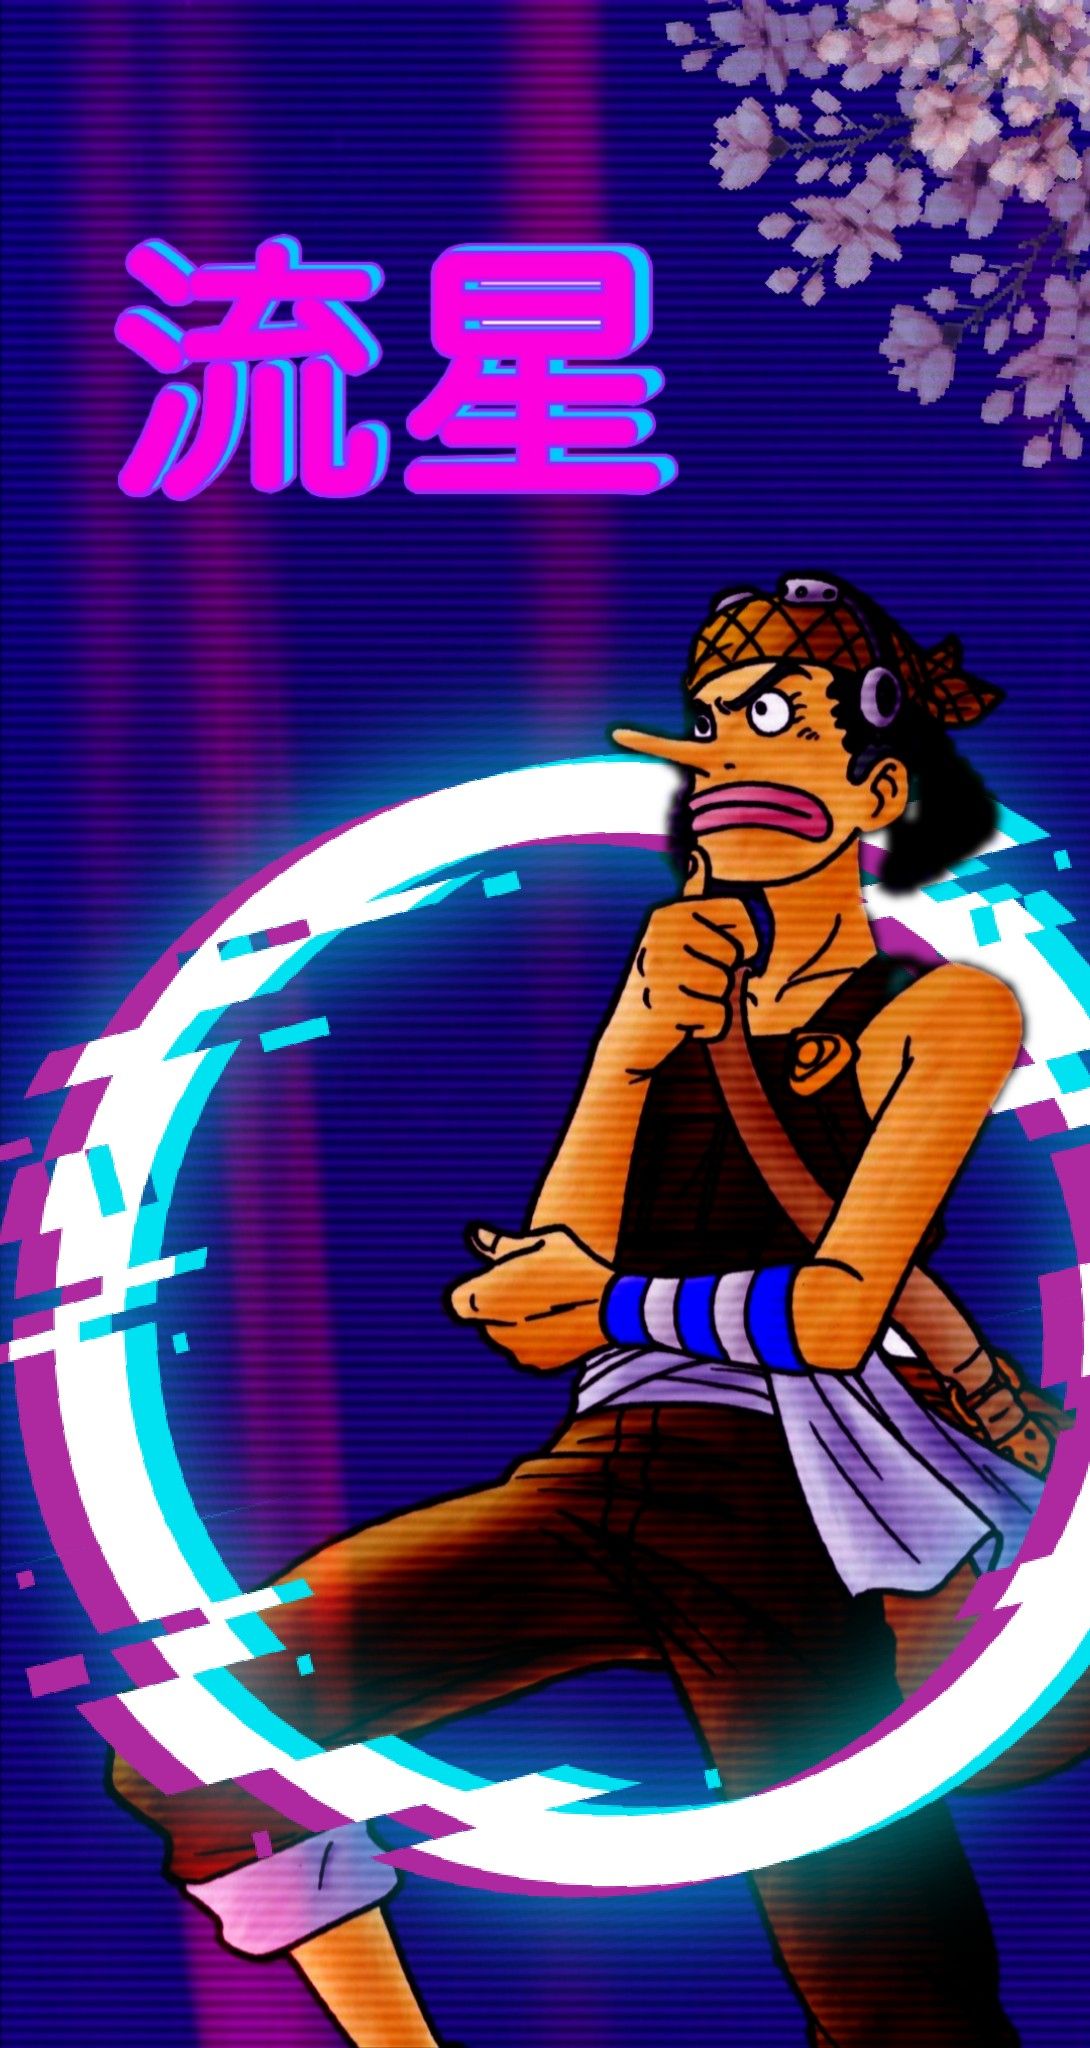 I made a vapourwave style phone wallpaper of my favourite character, Captain Usopp!